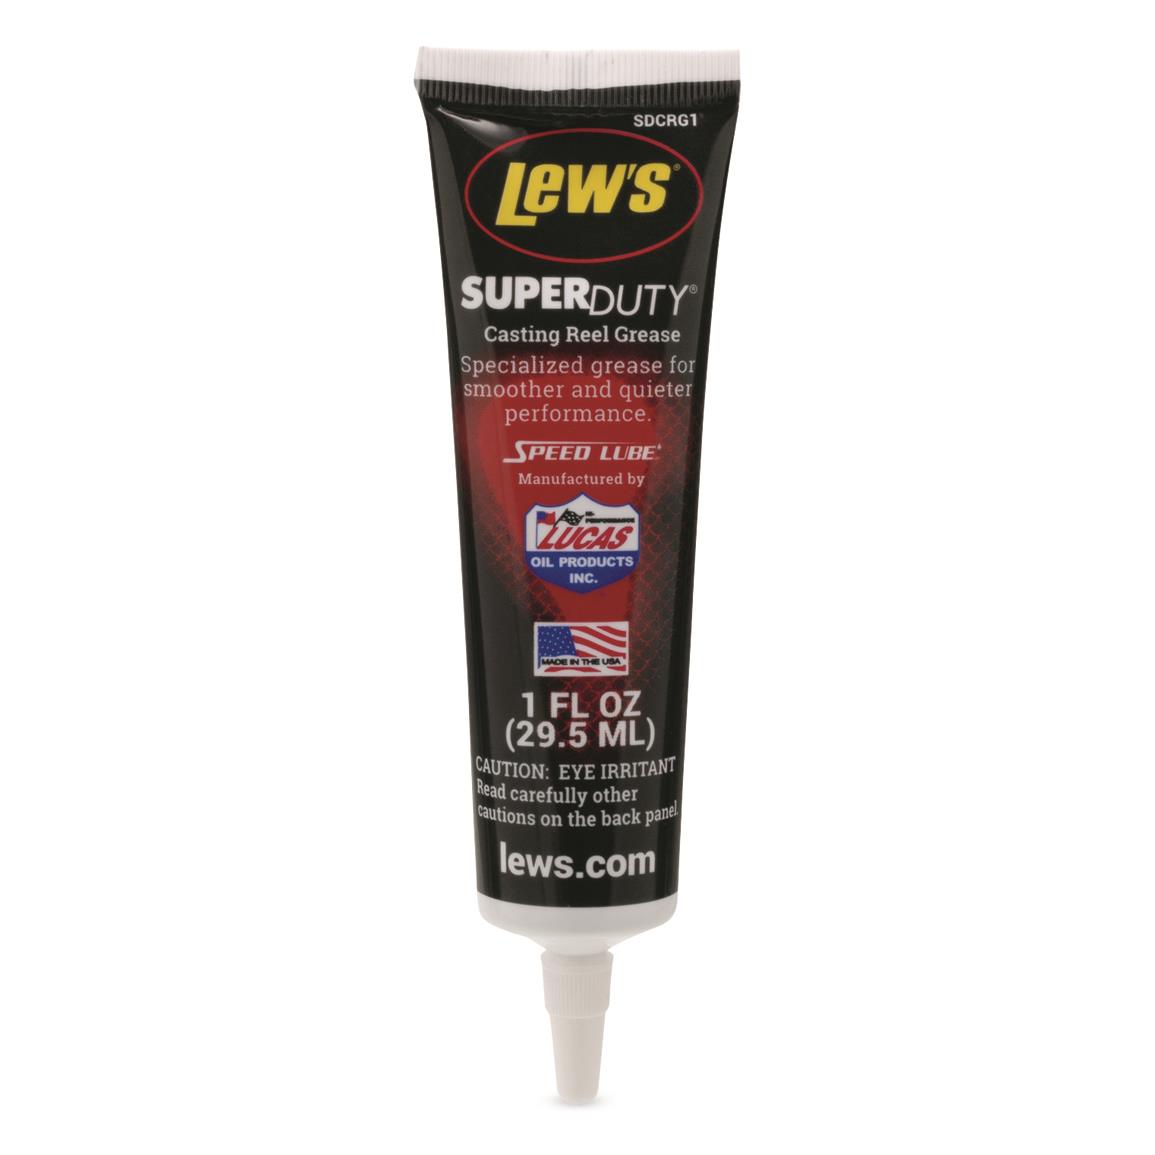 Lew's Super Duty Casting Reel Grease